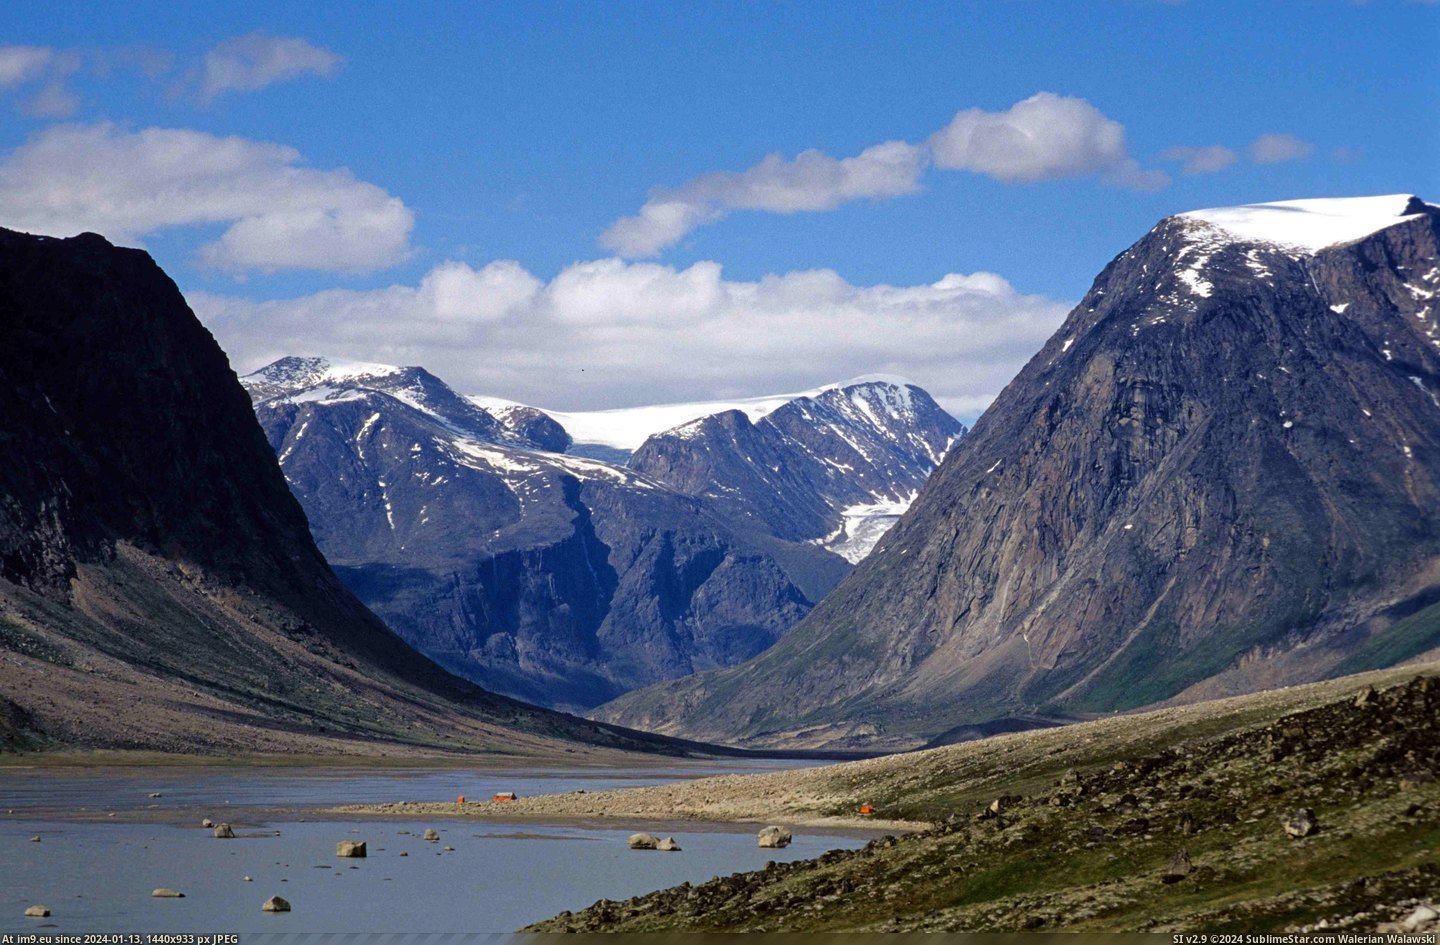 #Park #National #Auyuittuq #Fiord #Pangnirtung #Canada #Nunavut [Earthporn] Pangnirtung Fiord, Auyuittuq National Park, Nunavut, Canada [5280x3432] Pic. (Bild von album My r/EARTHPORN favs))